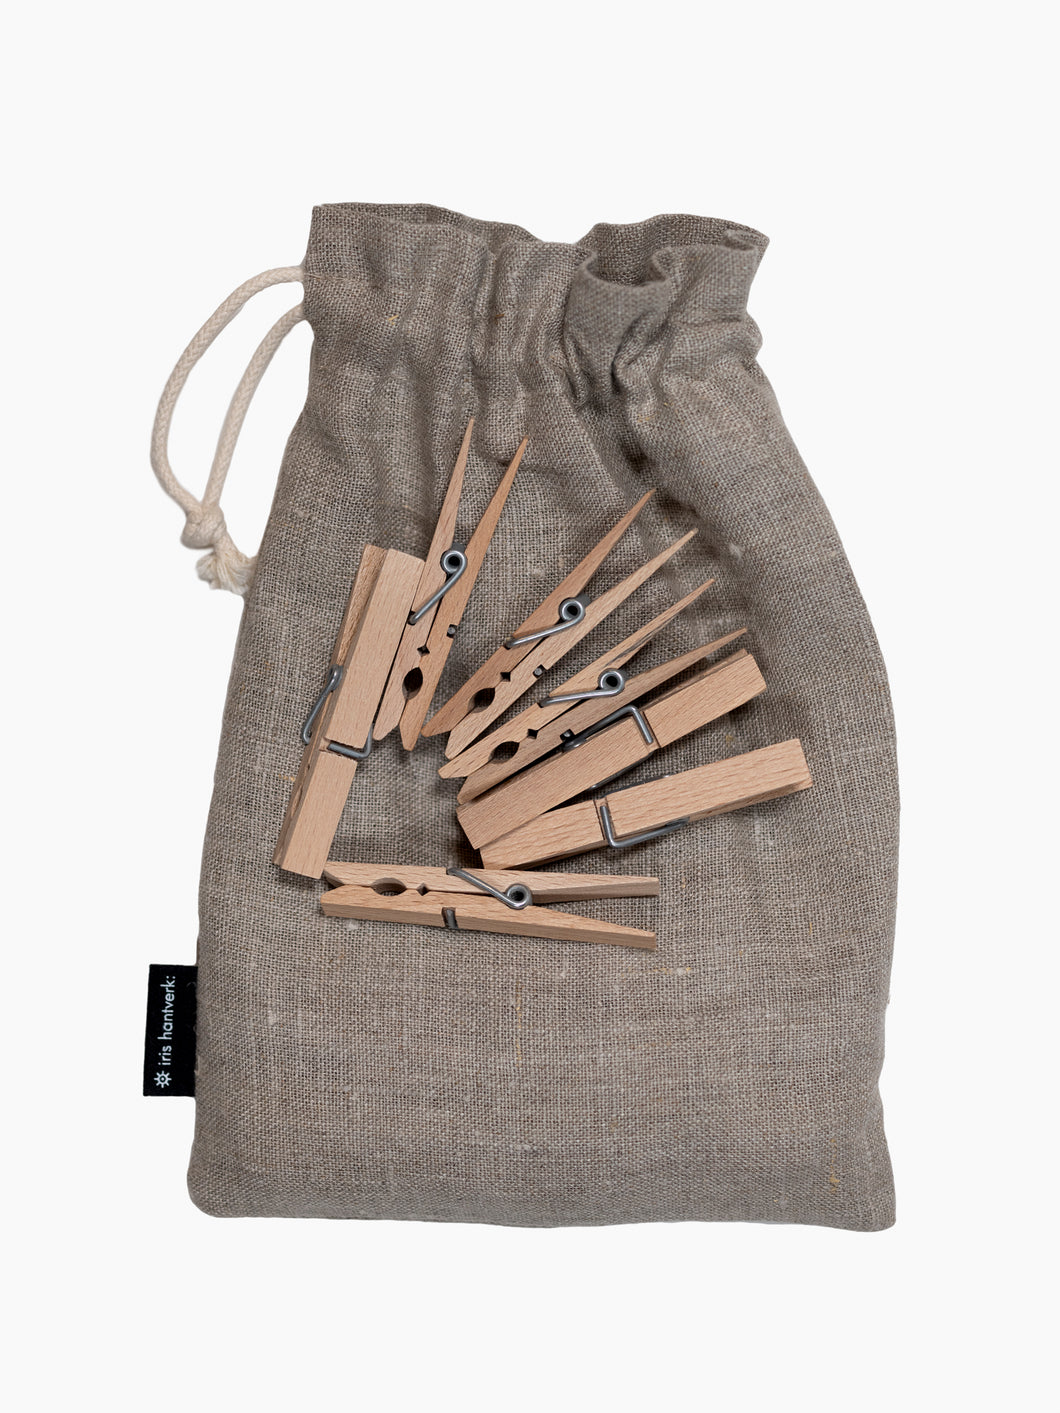 Clothes Pegs in Bag